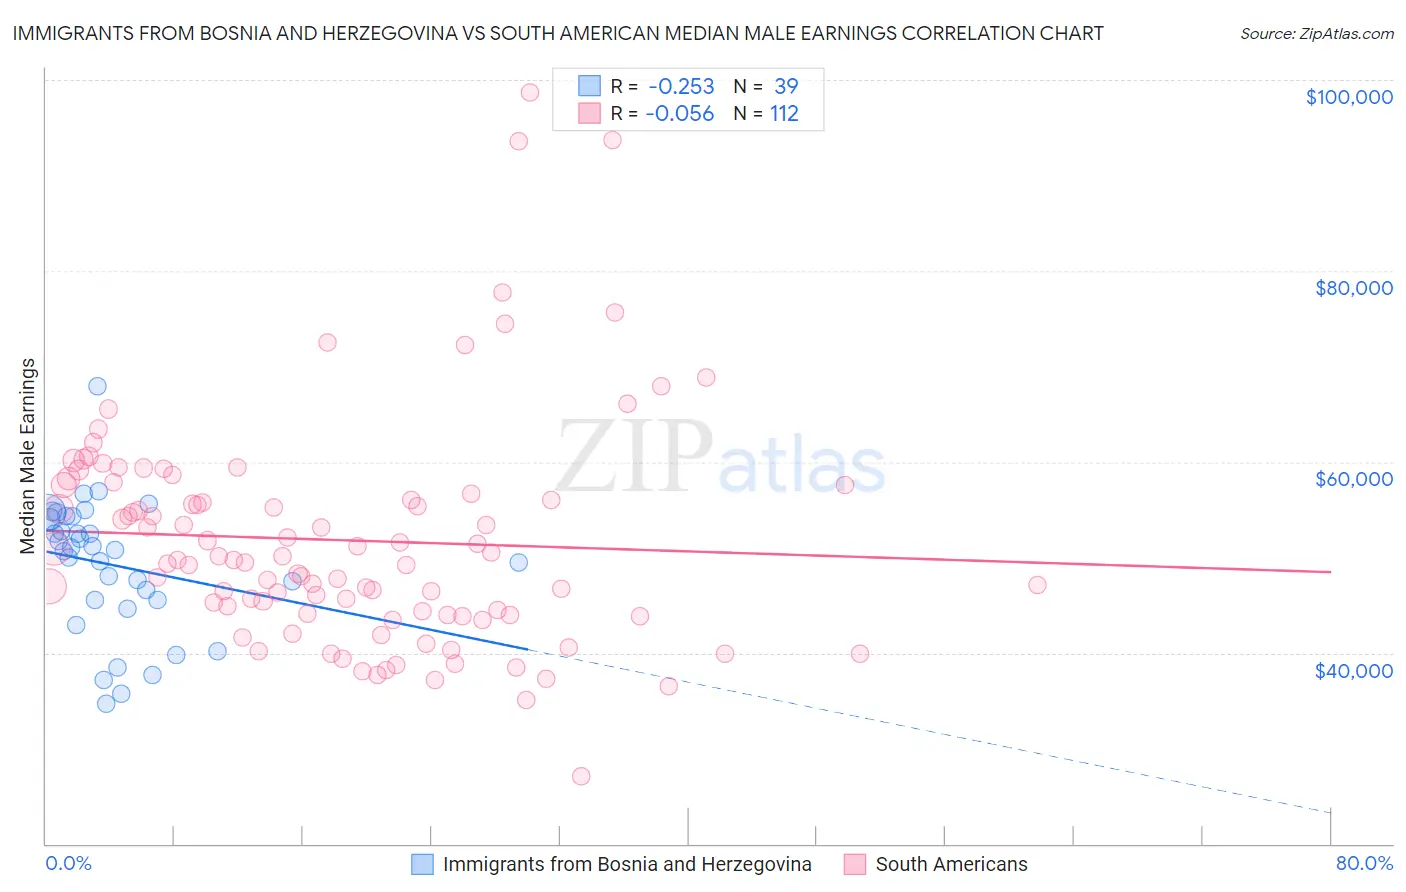 Immigrants from Bosnia and Herzegovina vs South American Median Male Earnings